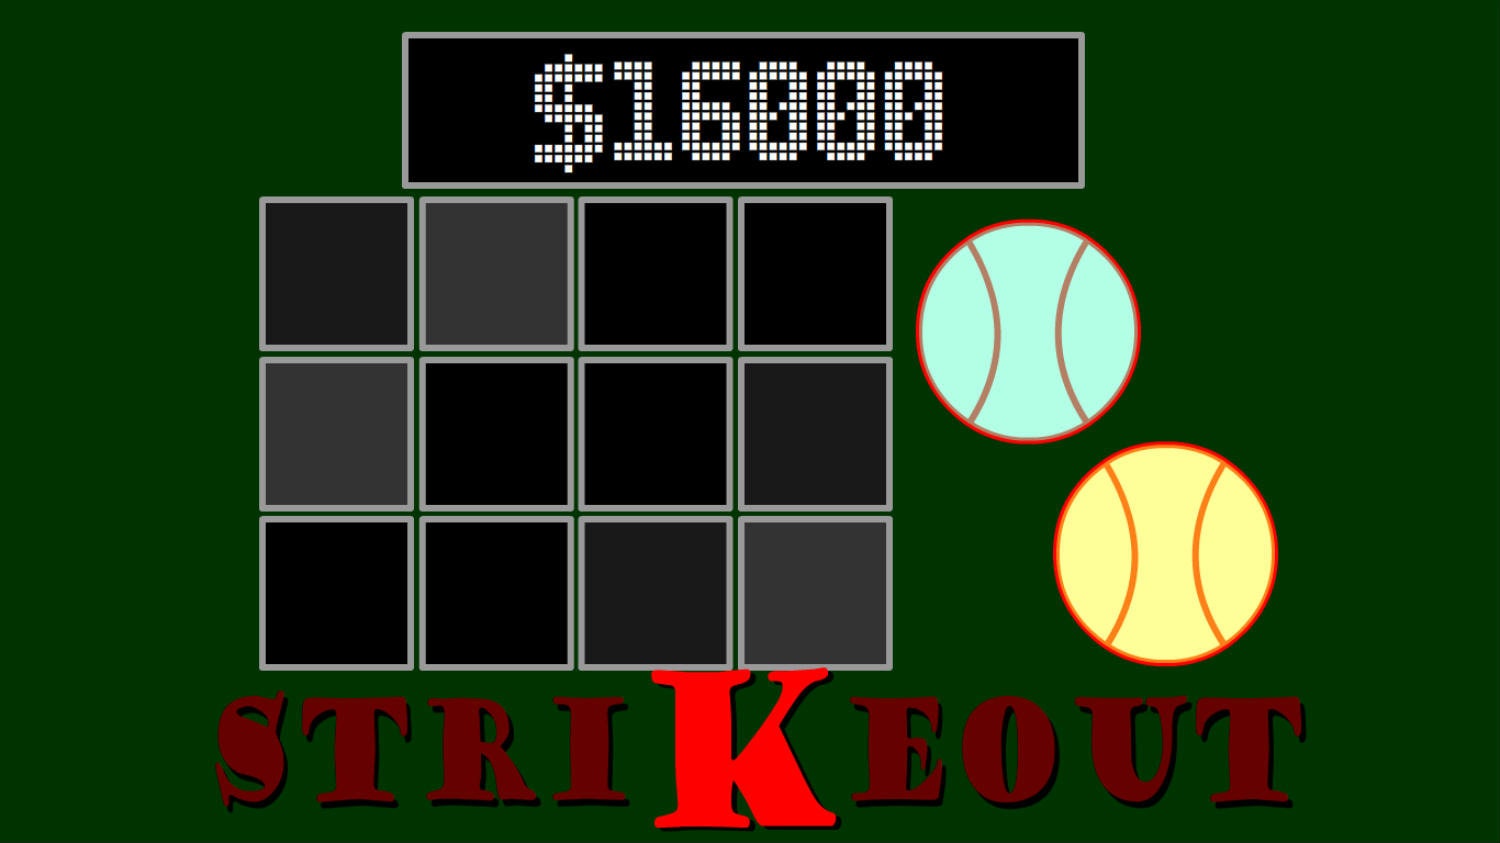 Strikeout Game Show Presentation Software for Windows Host